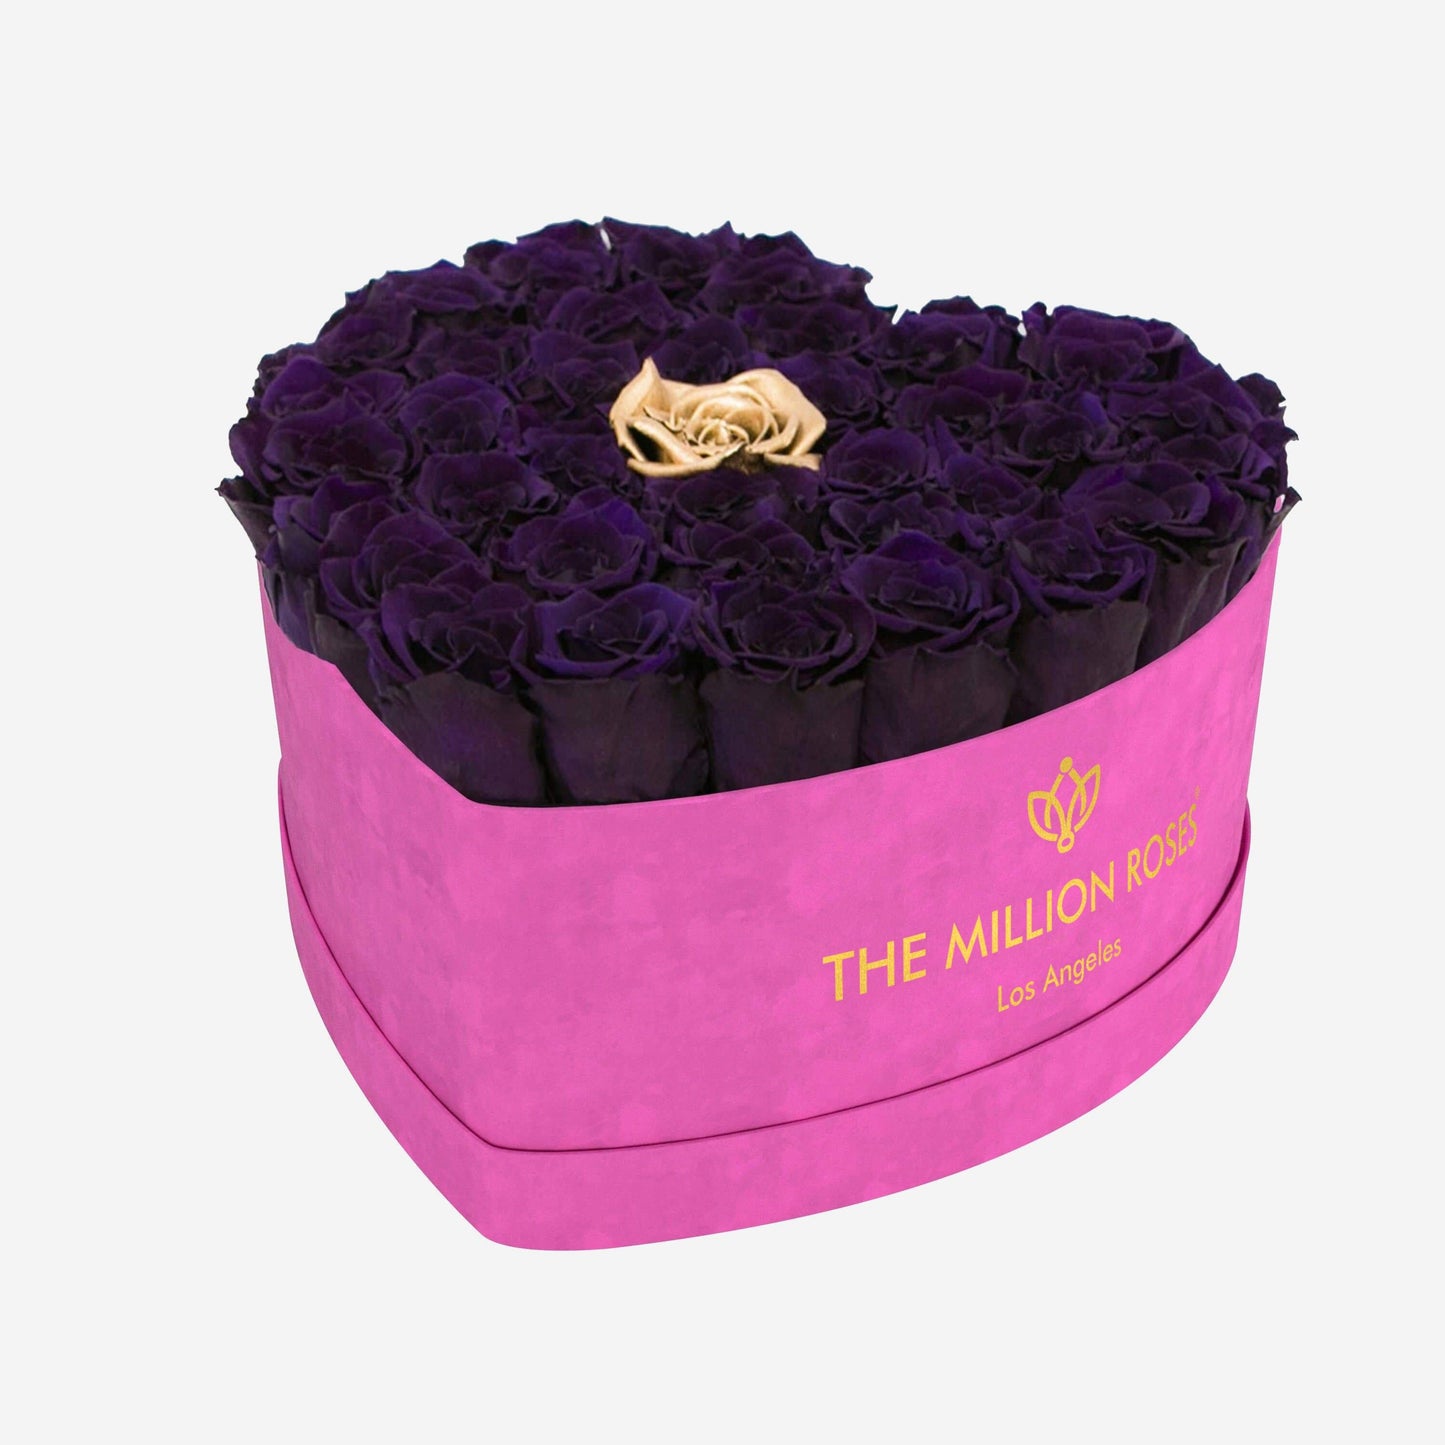 Heart Hot Pink Suede Box | Dark Purple & Gold Roses - The Million Roses